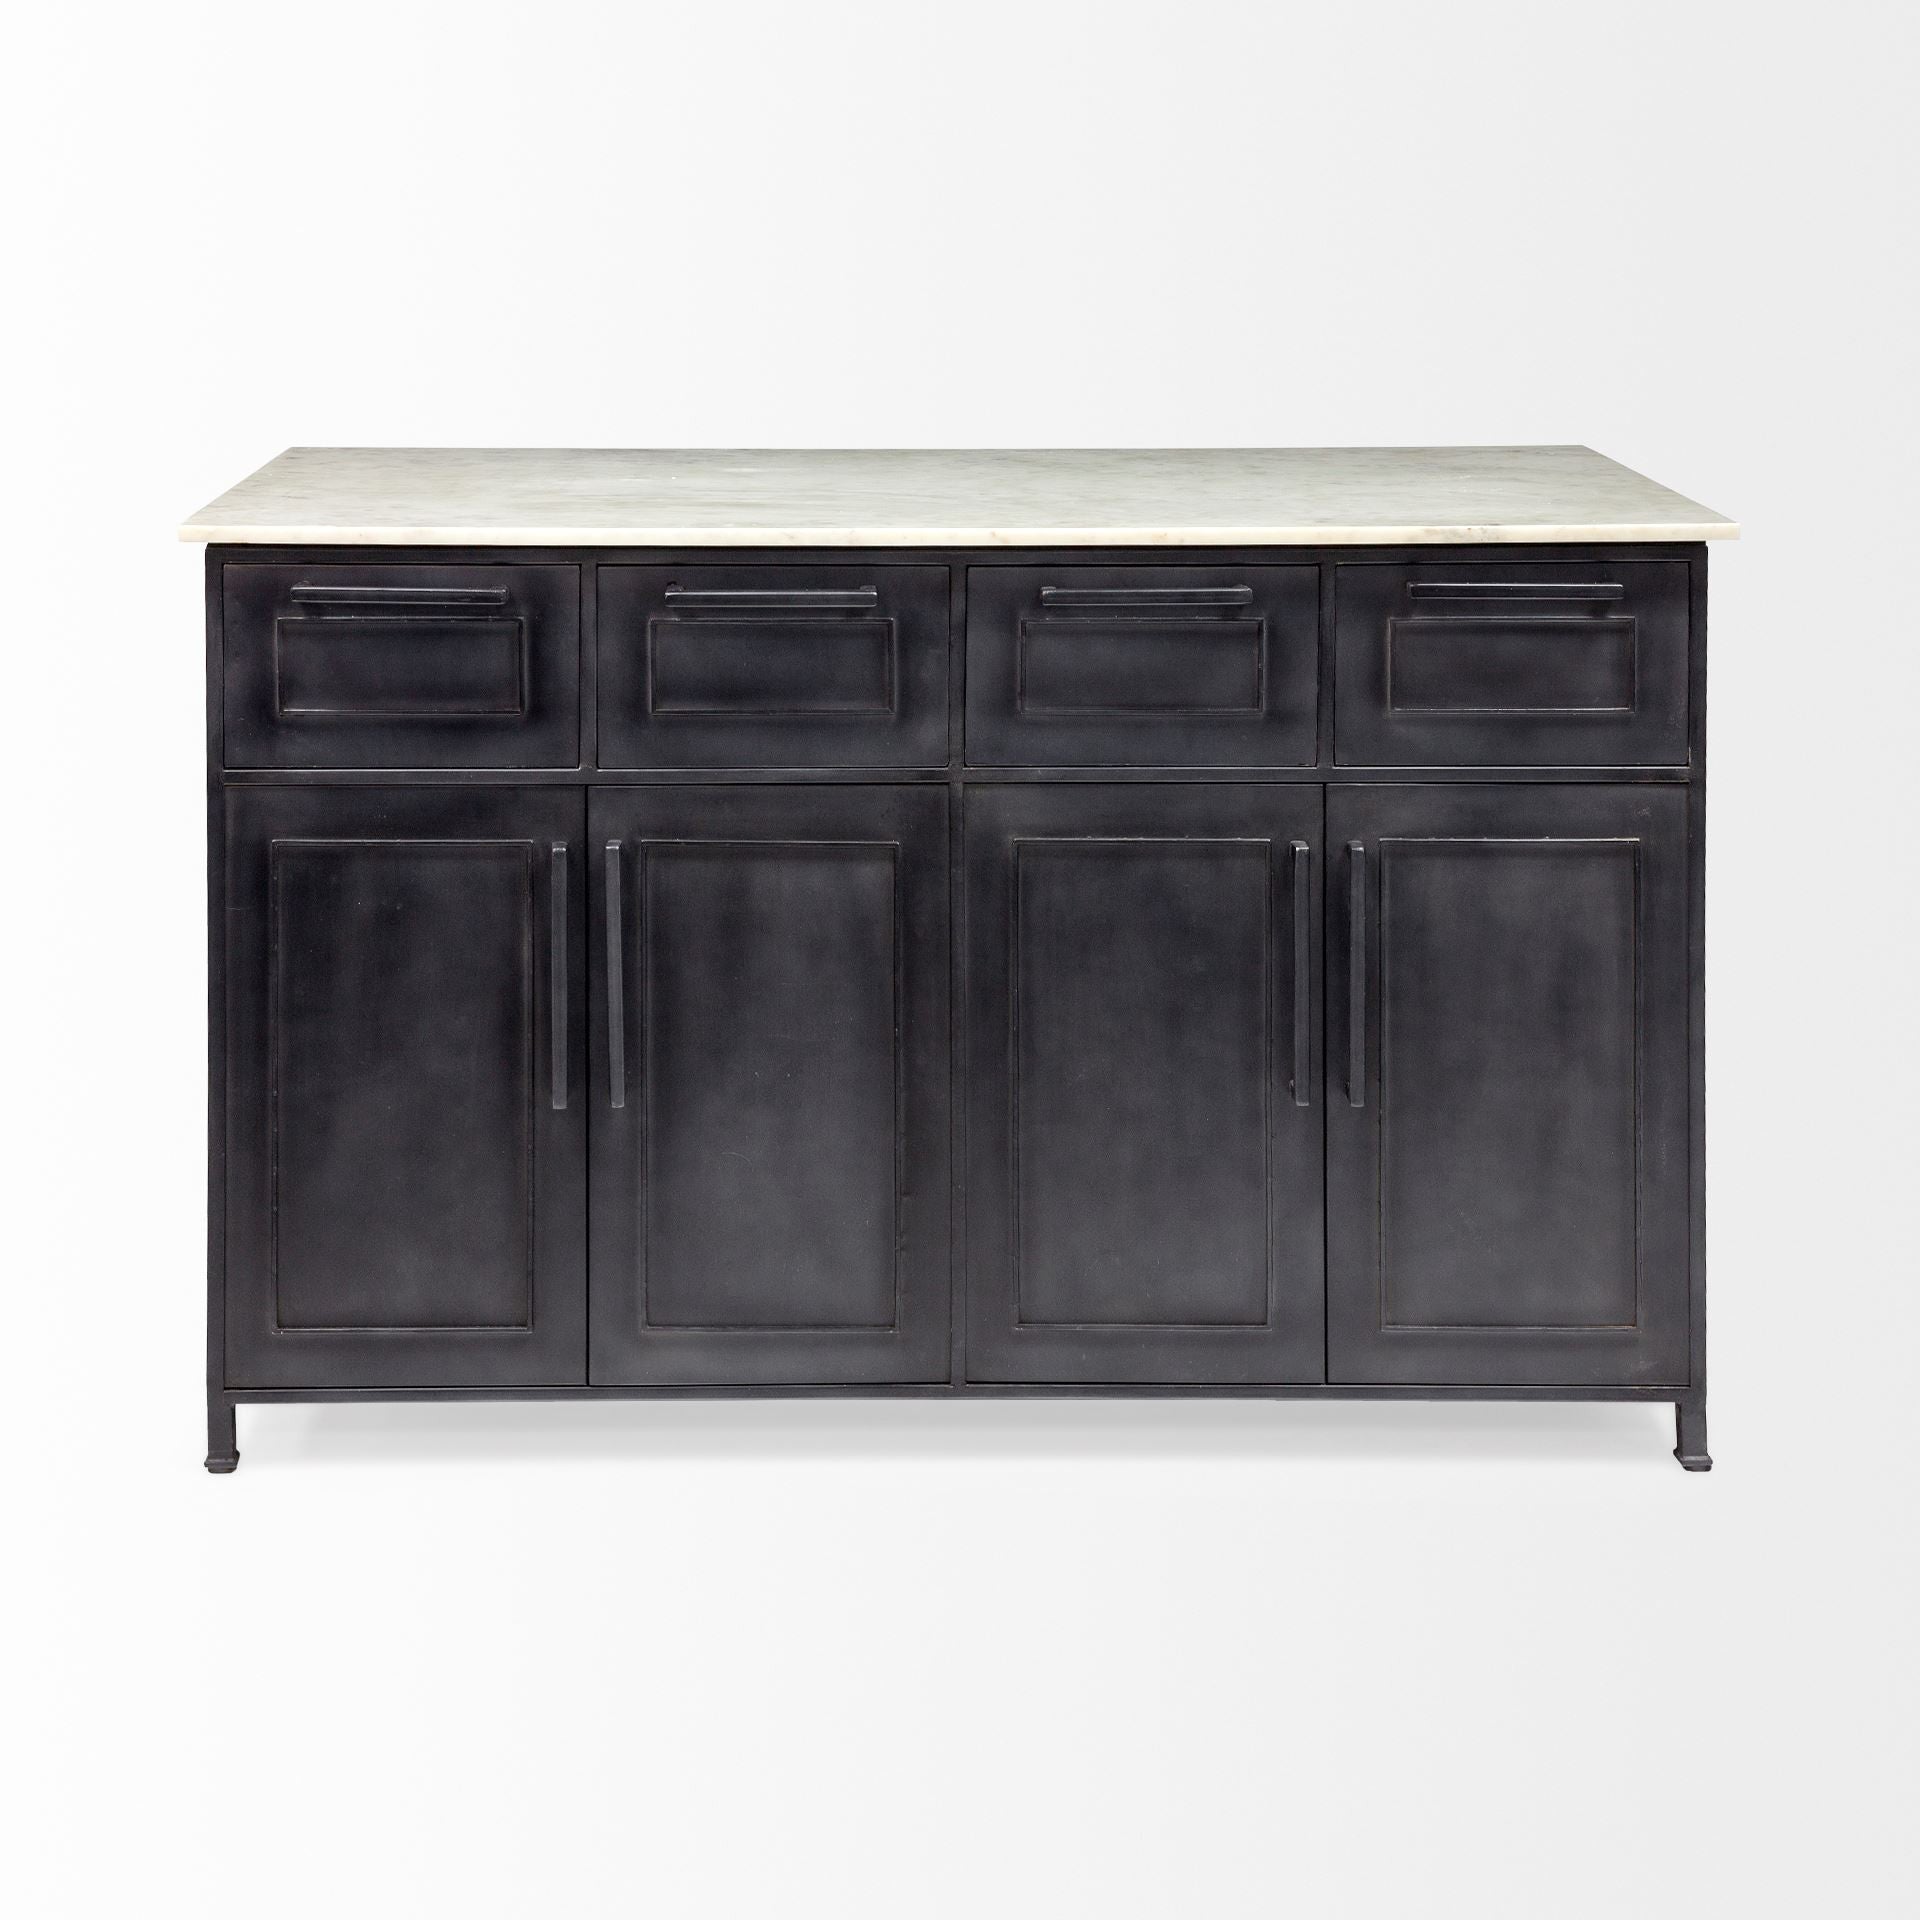 Solid Iron Black Body White Marble Top Kitchen Island With 4 Drawer